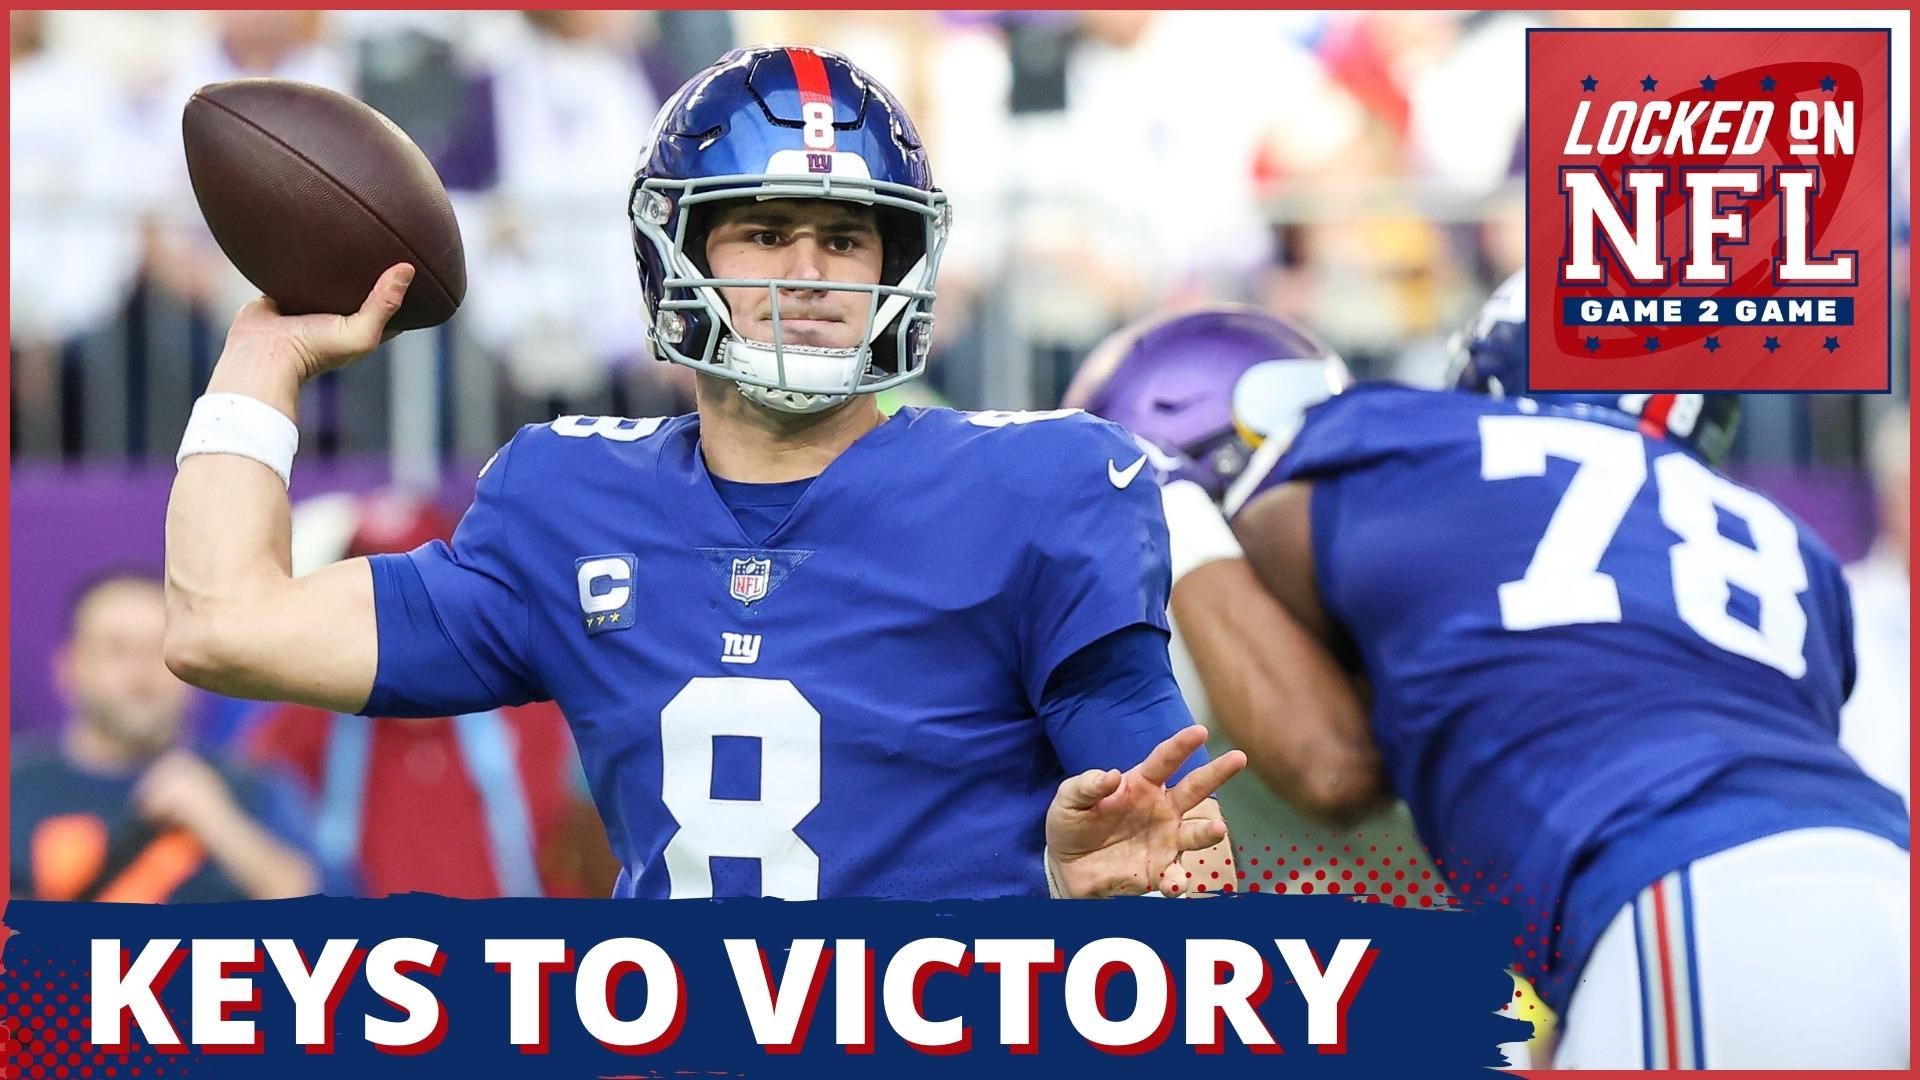 Giants rout Colts to make the playoffs for 1st time since 2016